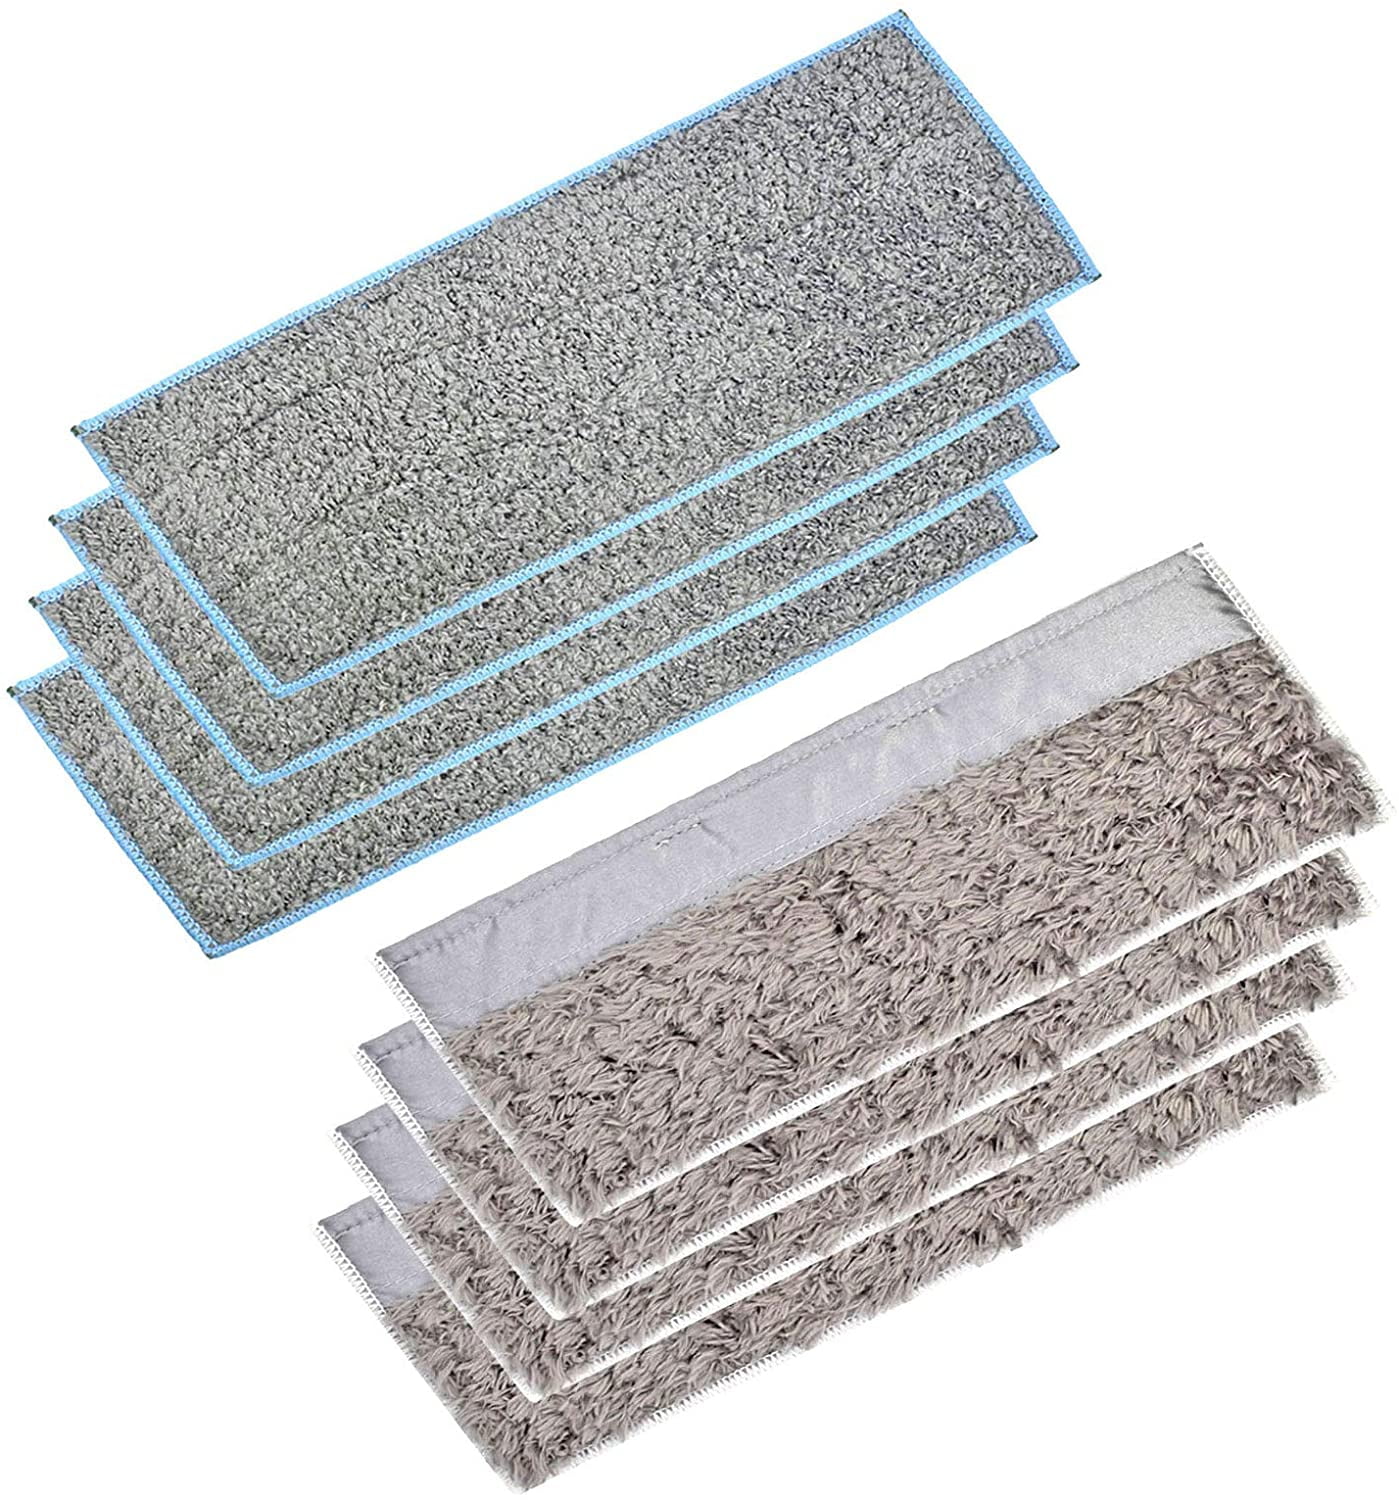 6 Pack Washable Wet Mopping Pads Reusable Wet Pads For iRobot Braava Jet M6 